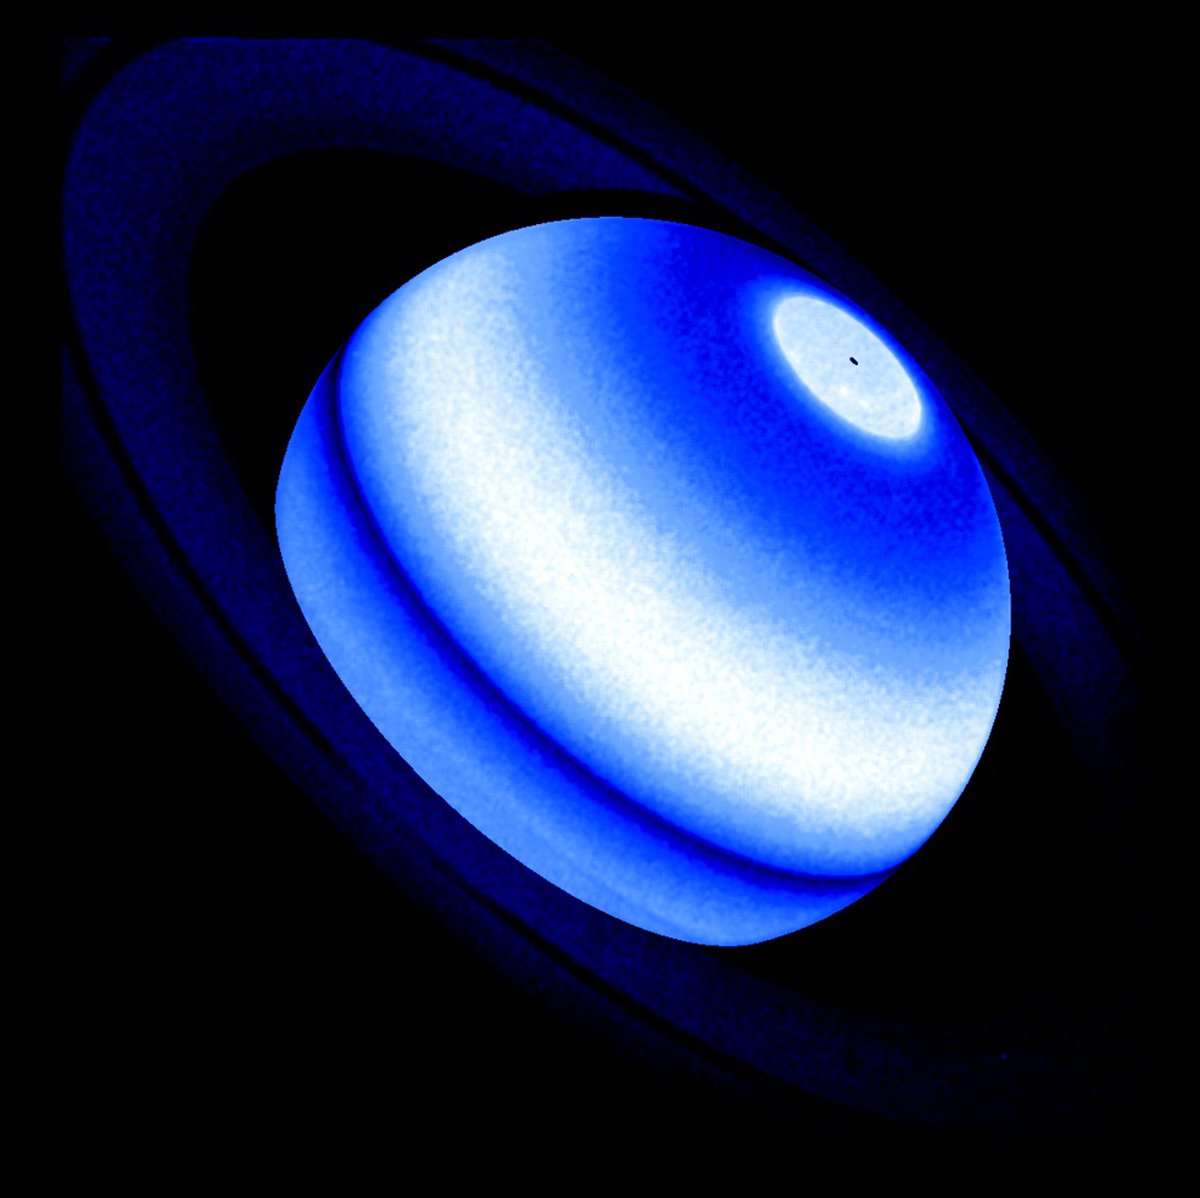 Saturn's rings turned out to be the planet's heaters